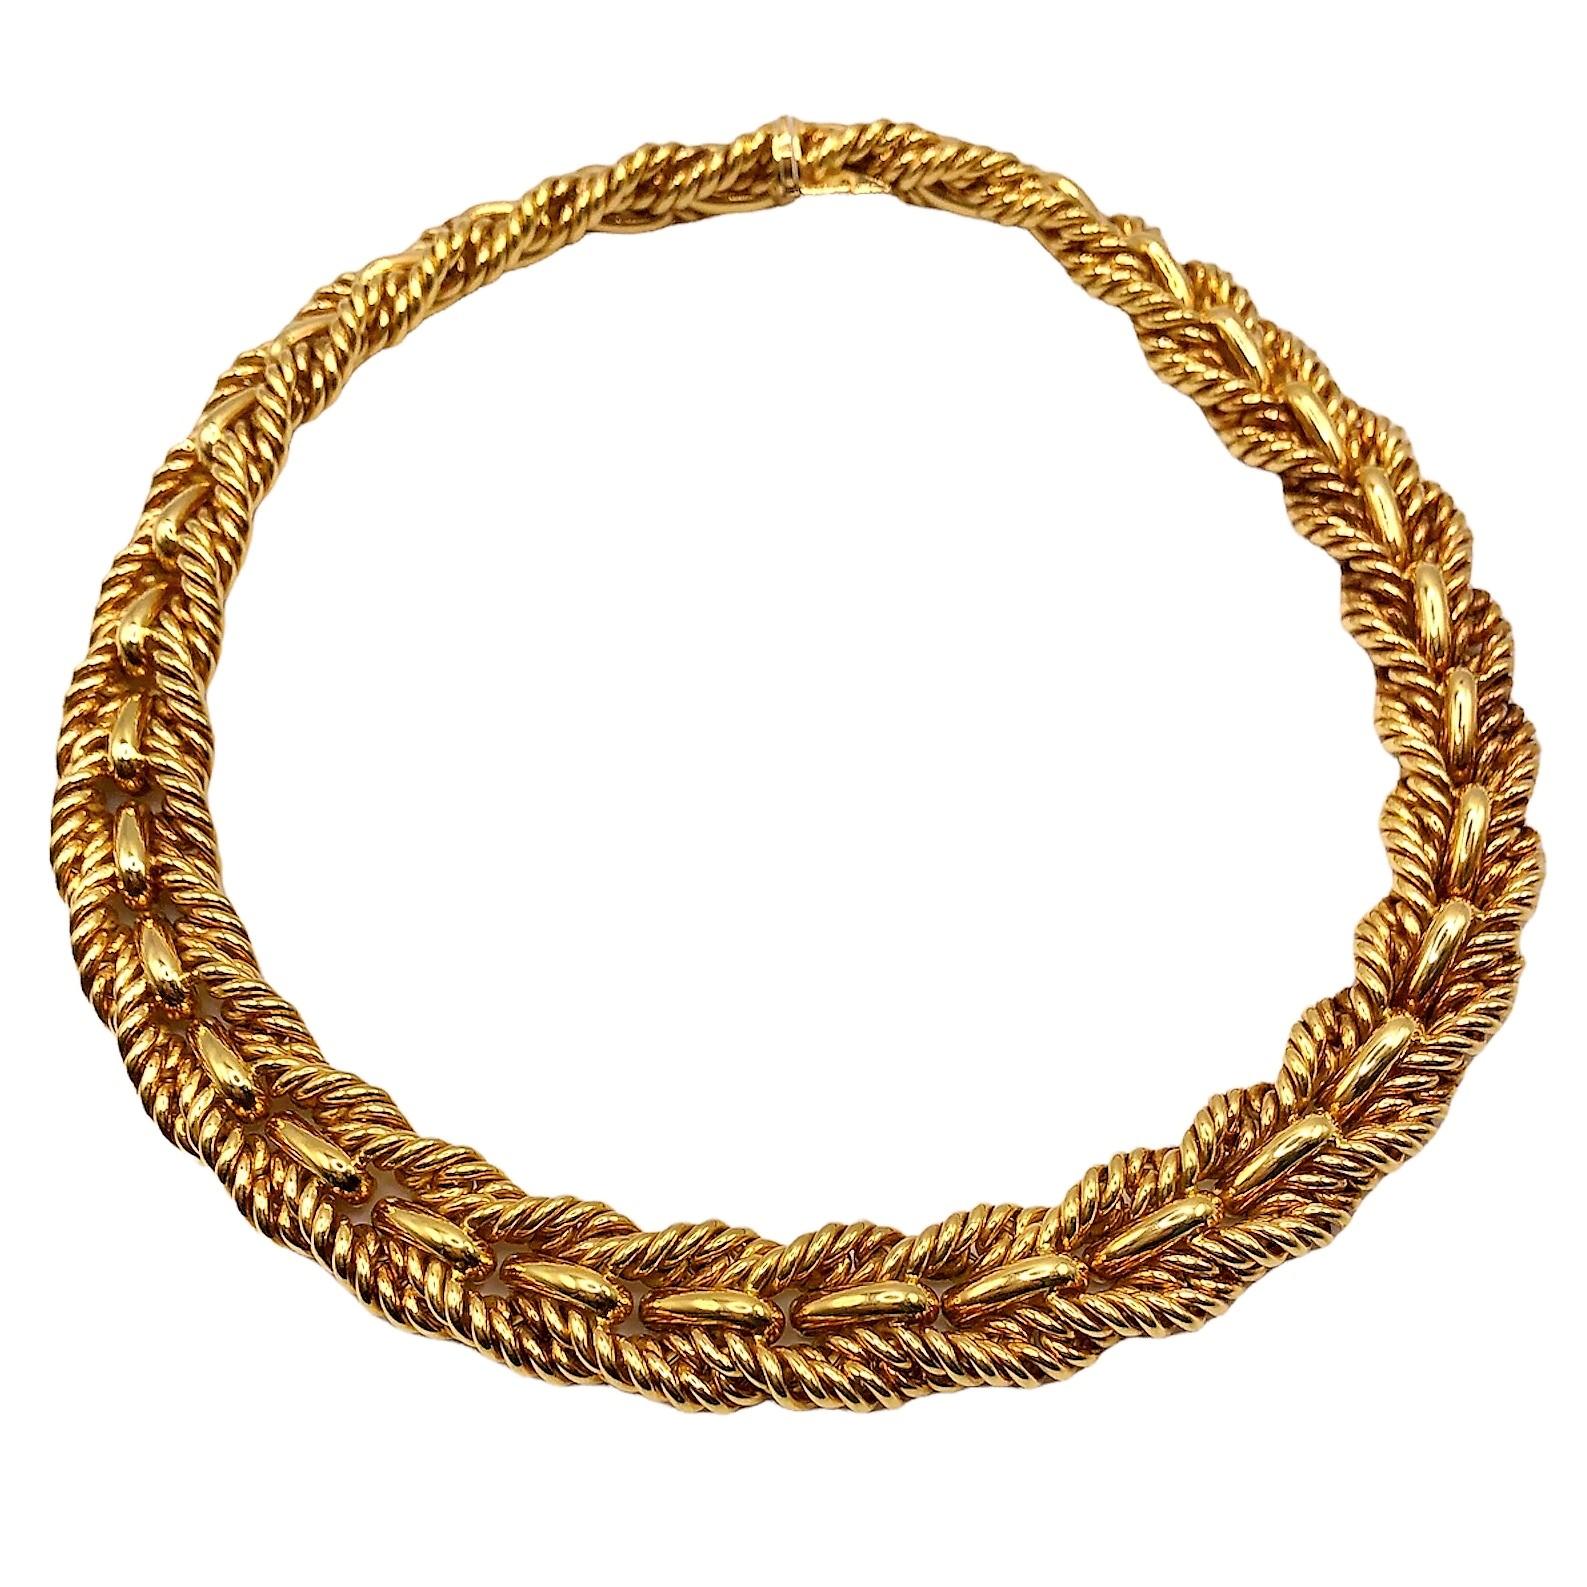 This elegant 18k yellow gold Tiffany & Co. necklace is designed with two rope edges bracketing a center line of repeating high polish bombe motifs. Measures 17 1/2 inches long by 5/8 inches wide. A rich patina adds to it's elegance. The inline